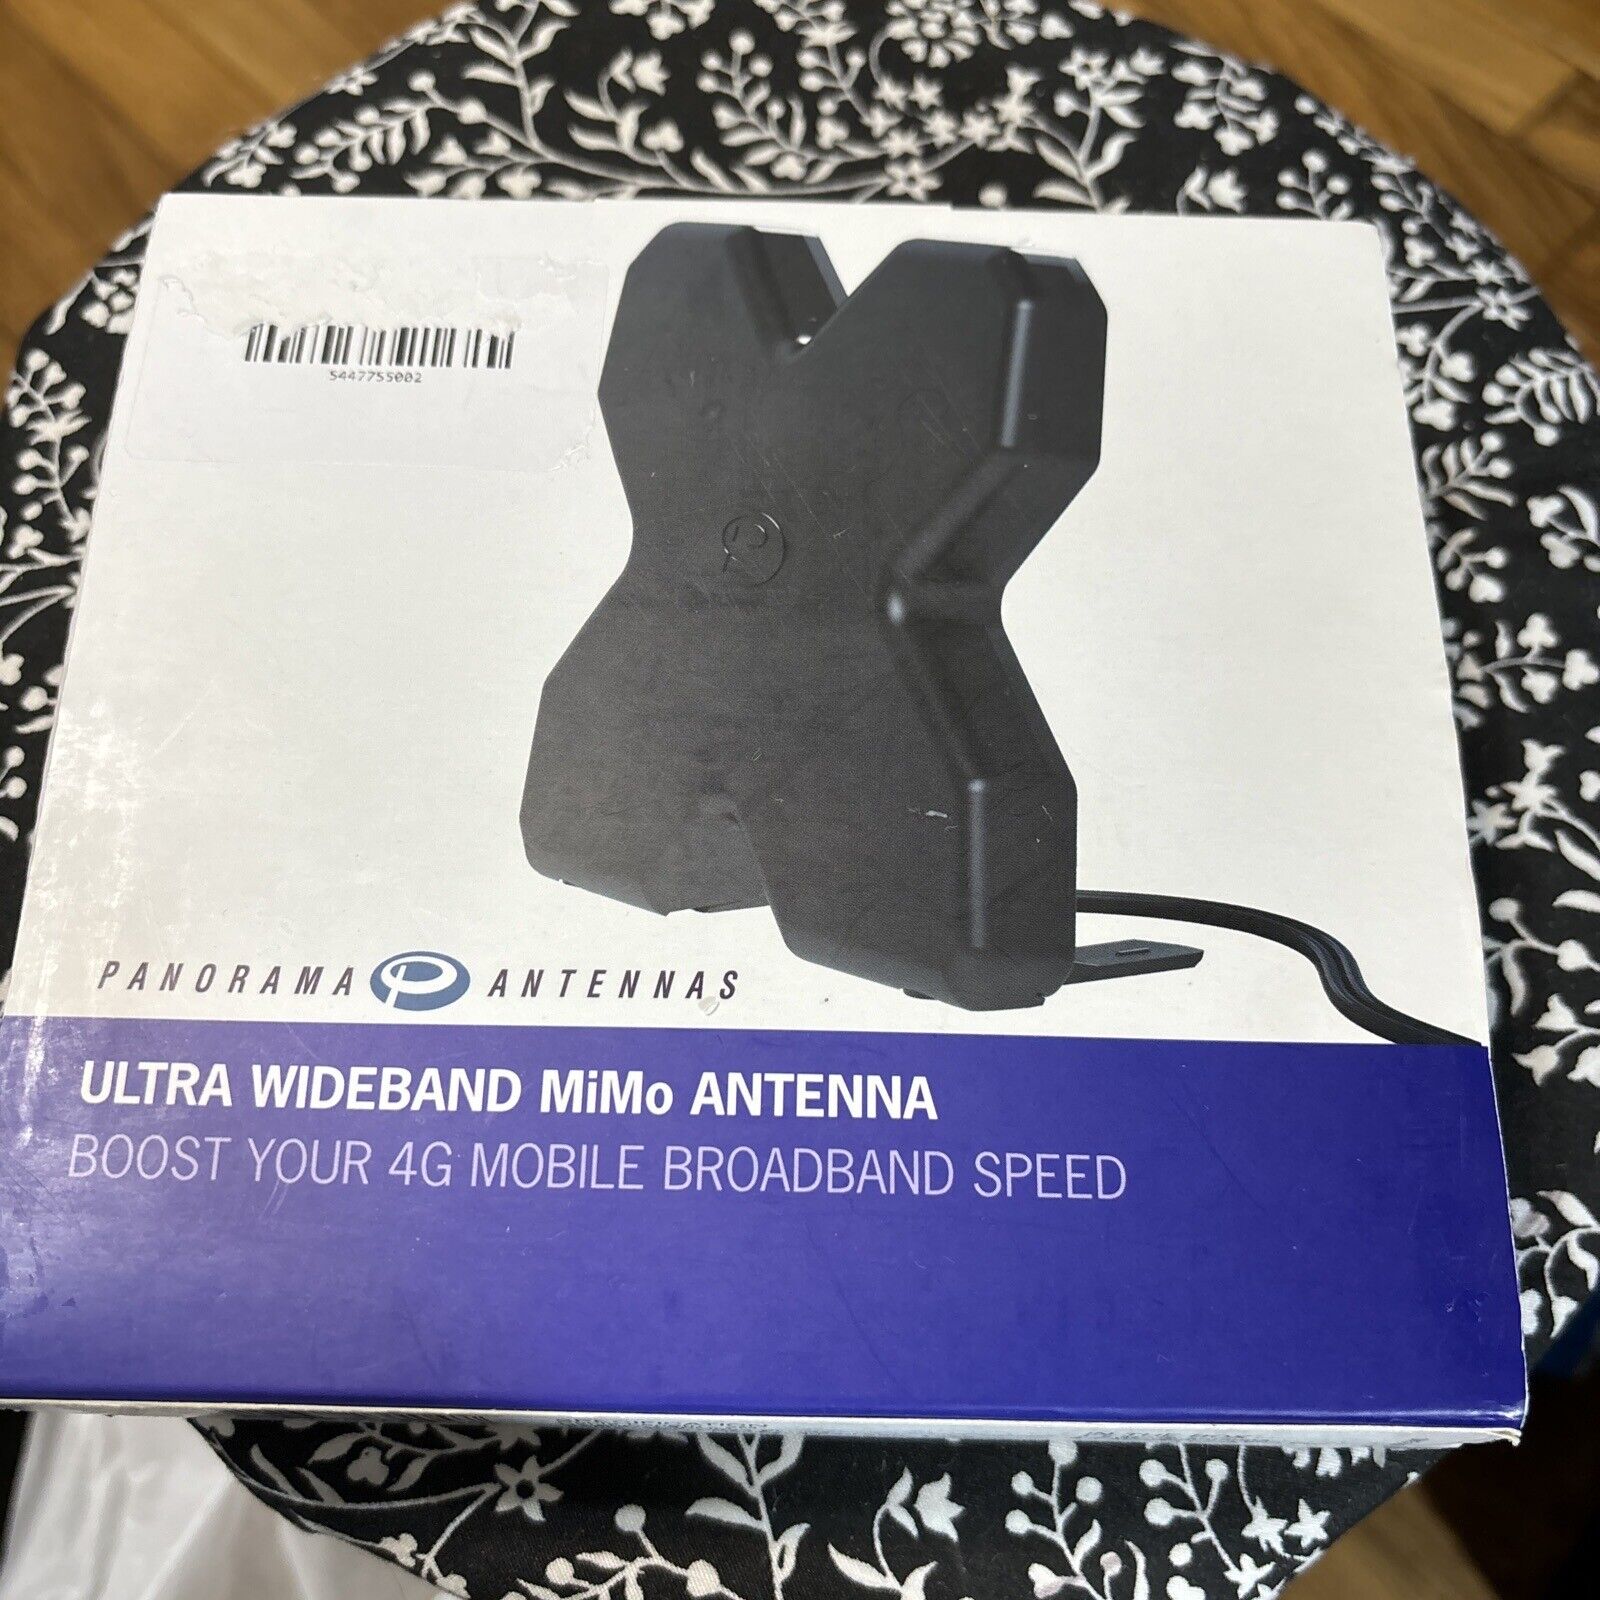 ✅NEW Ultra Wideband 4G MIMO Desk Mount Antenna Panorama DMM-7-27-2SP SHIPS NOW! Panorama DMM-7-27-2SP